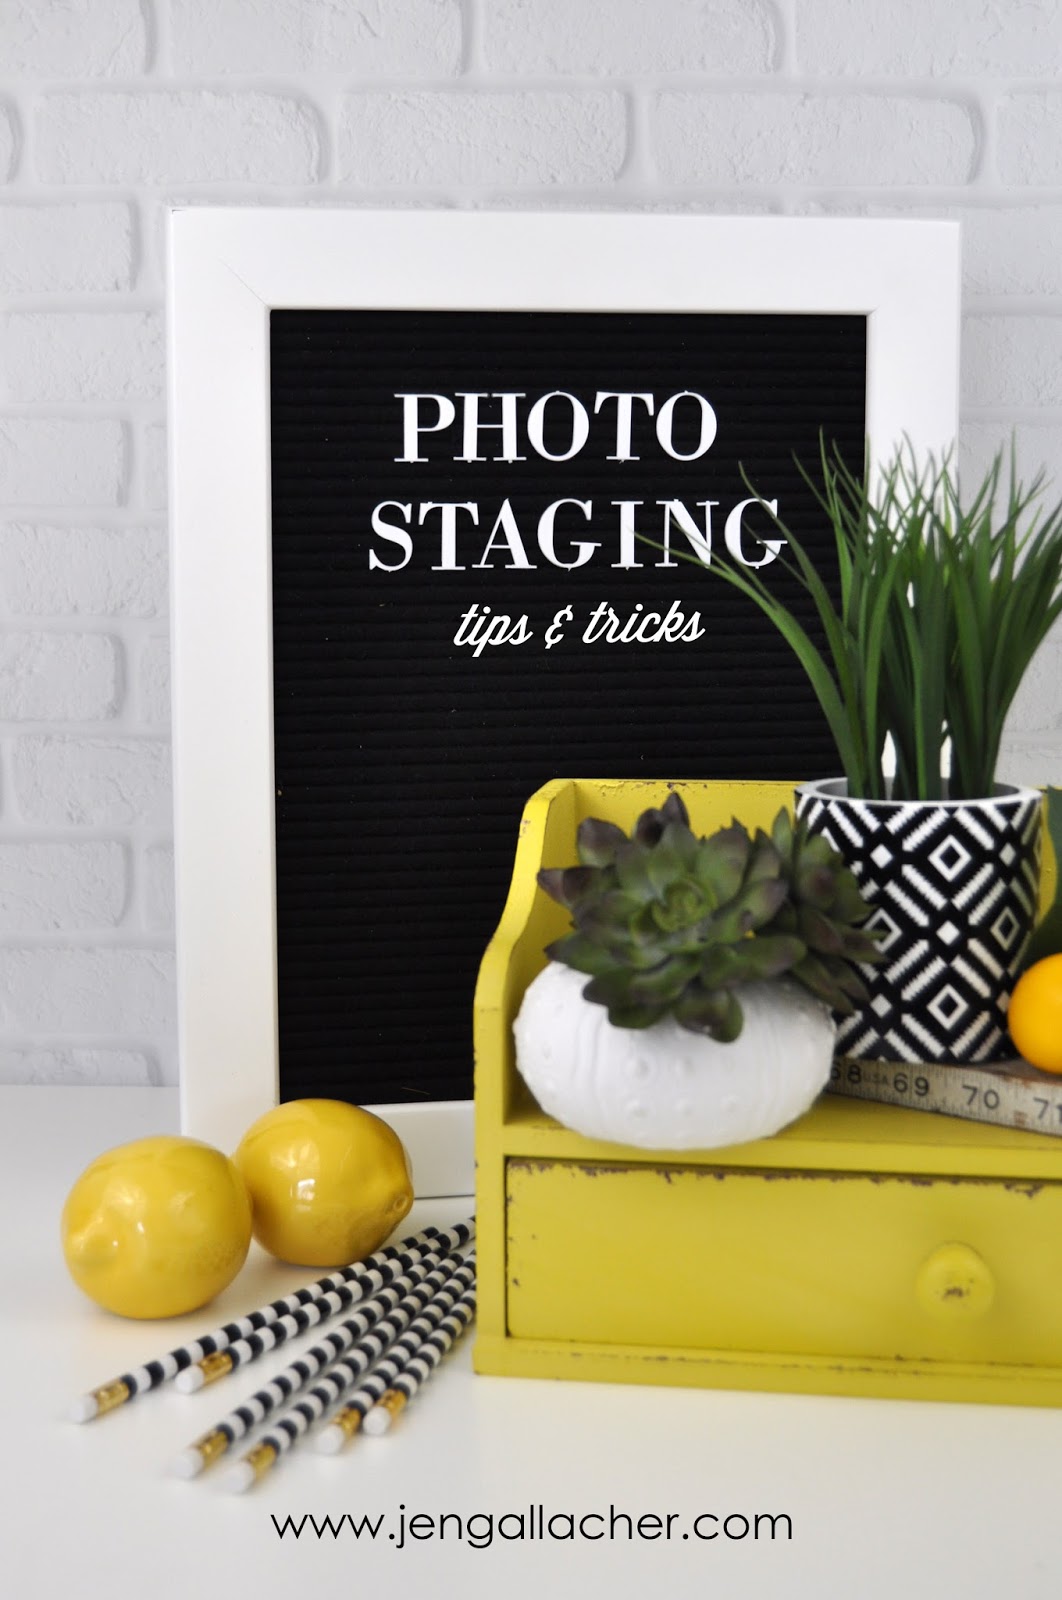 Tips and tricks for staging photos for bloggers and creatives. How to stage blog photography photoshoots with Jen Gallacher. Blogging photography tips. #photography #blogging #jengallacher